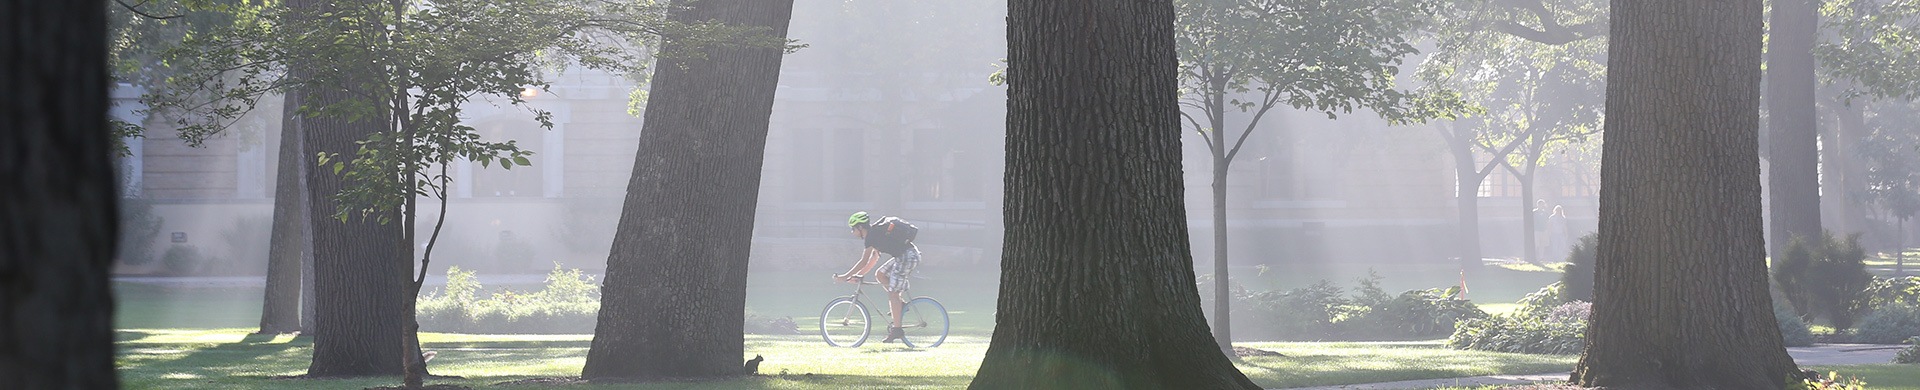 Person riding a bike across old campus